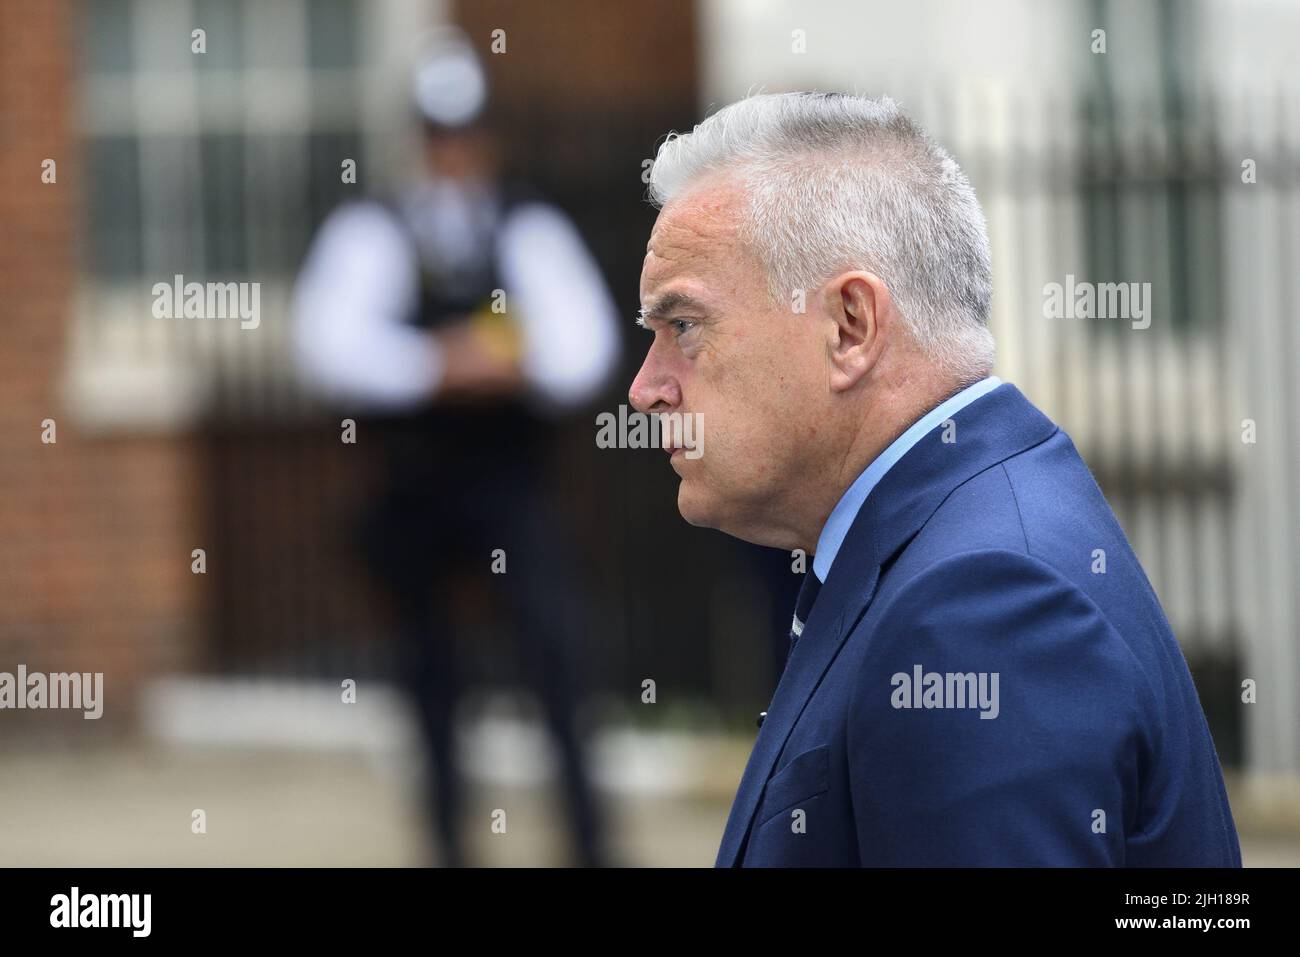 Huw Edwards - BBC newsreader and presenter - in Downing Street on the day Prime Johnson resigned as Prime Minister - July 7th 2022 Stock Photo